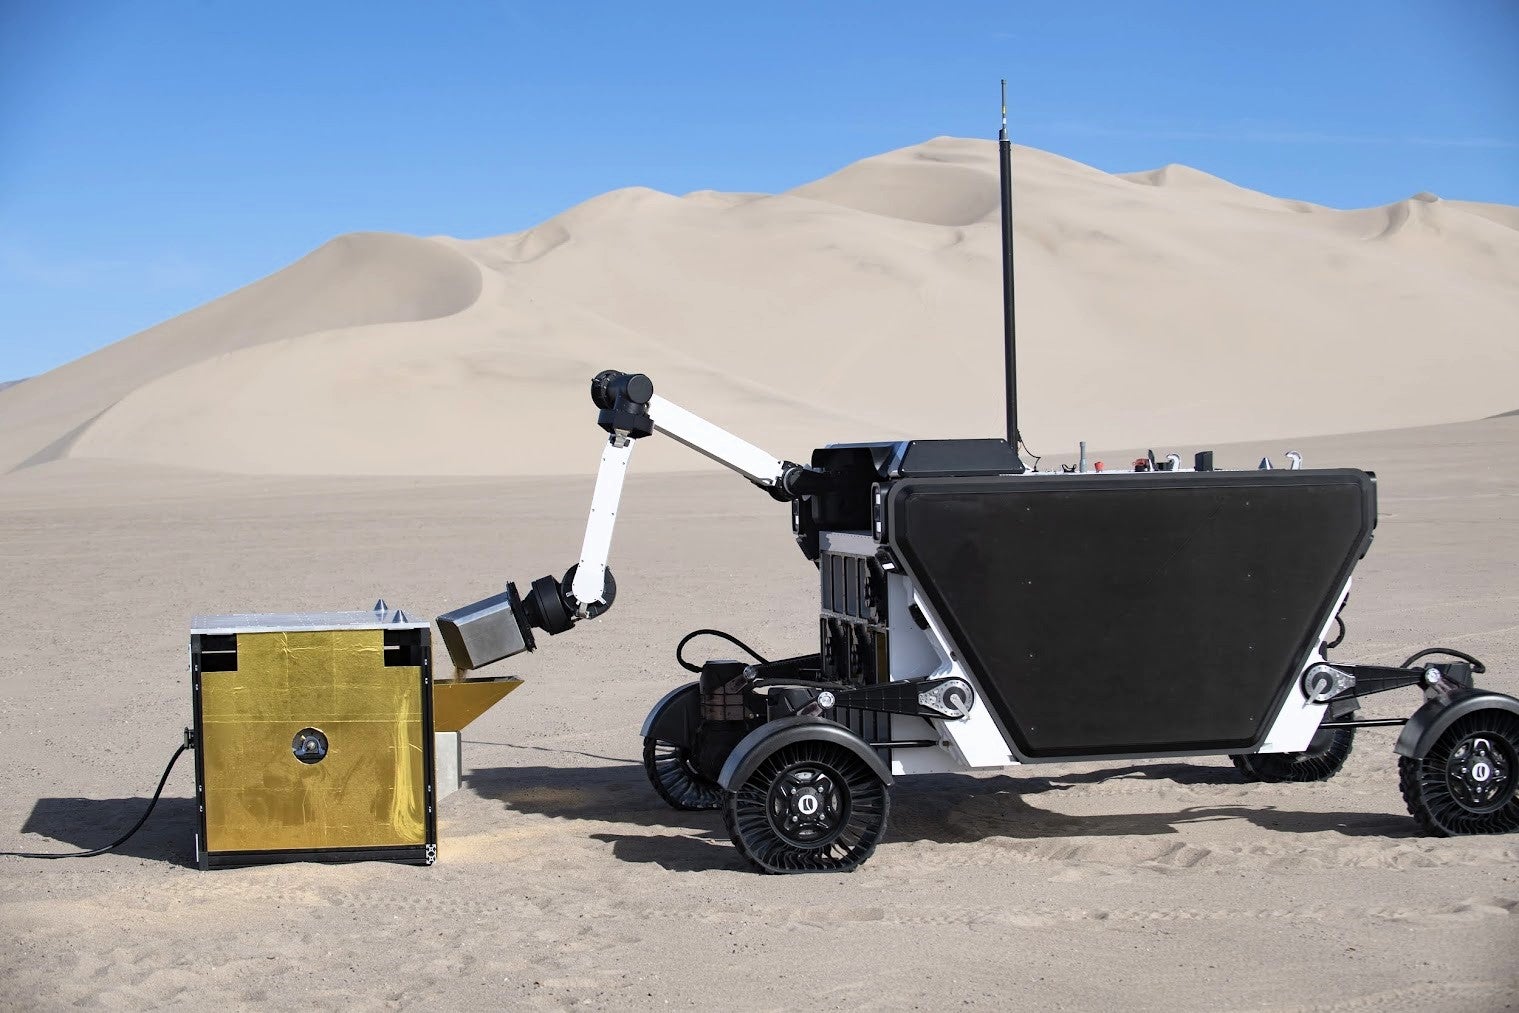 Astrolab’s rover is set to be sent to the Moon aboard a SpaceX rocket in 2026